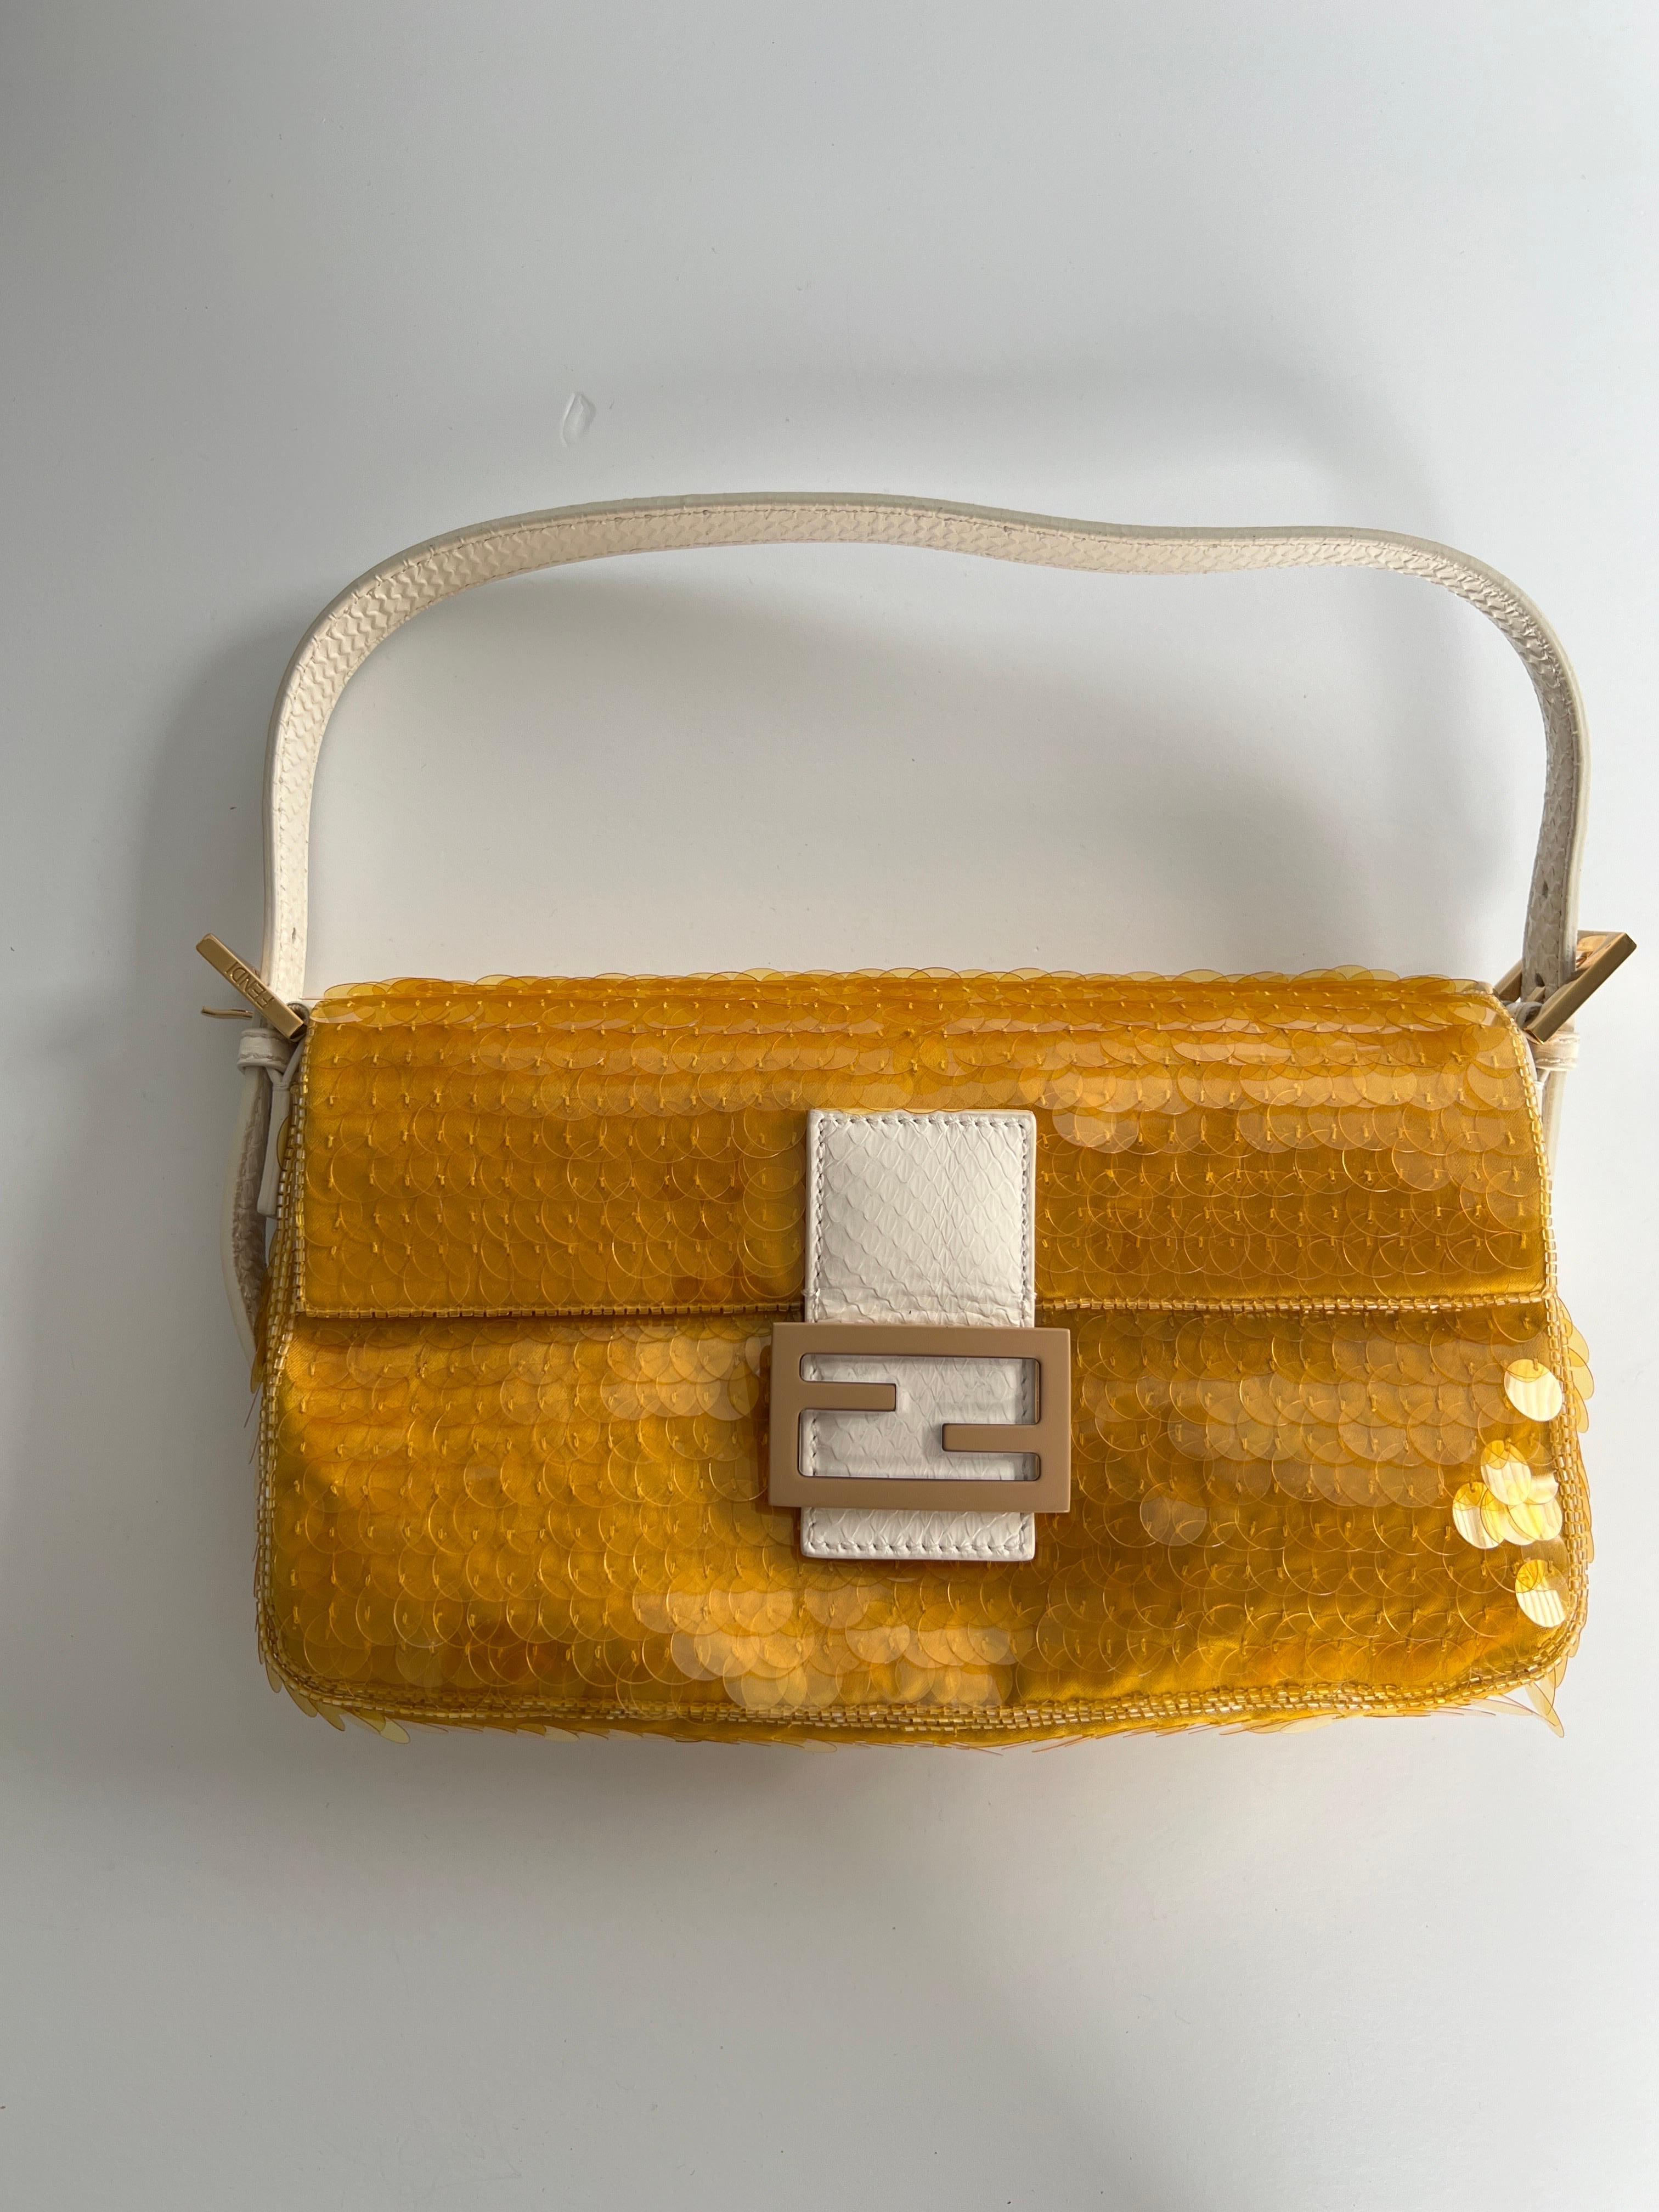 This is an authentic FENDI Satin Sequin Paillettes Elaphe Plexiglass Baguette 1997 in Giallo and Avorio. This handbag is crafted of fabric covered in yellow sequins. The bag features a white python-printed snakeskin strap and a resin Fendi FF logo